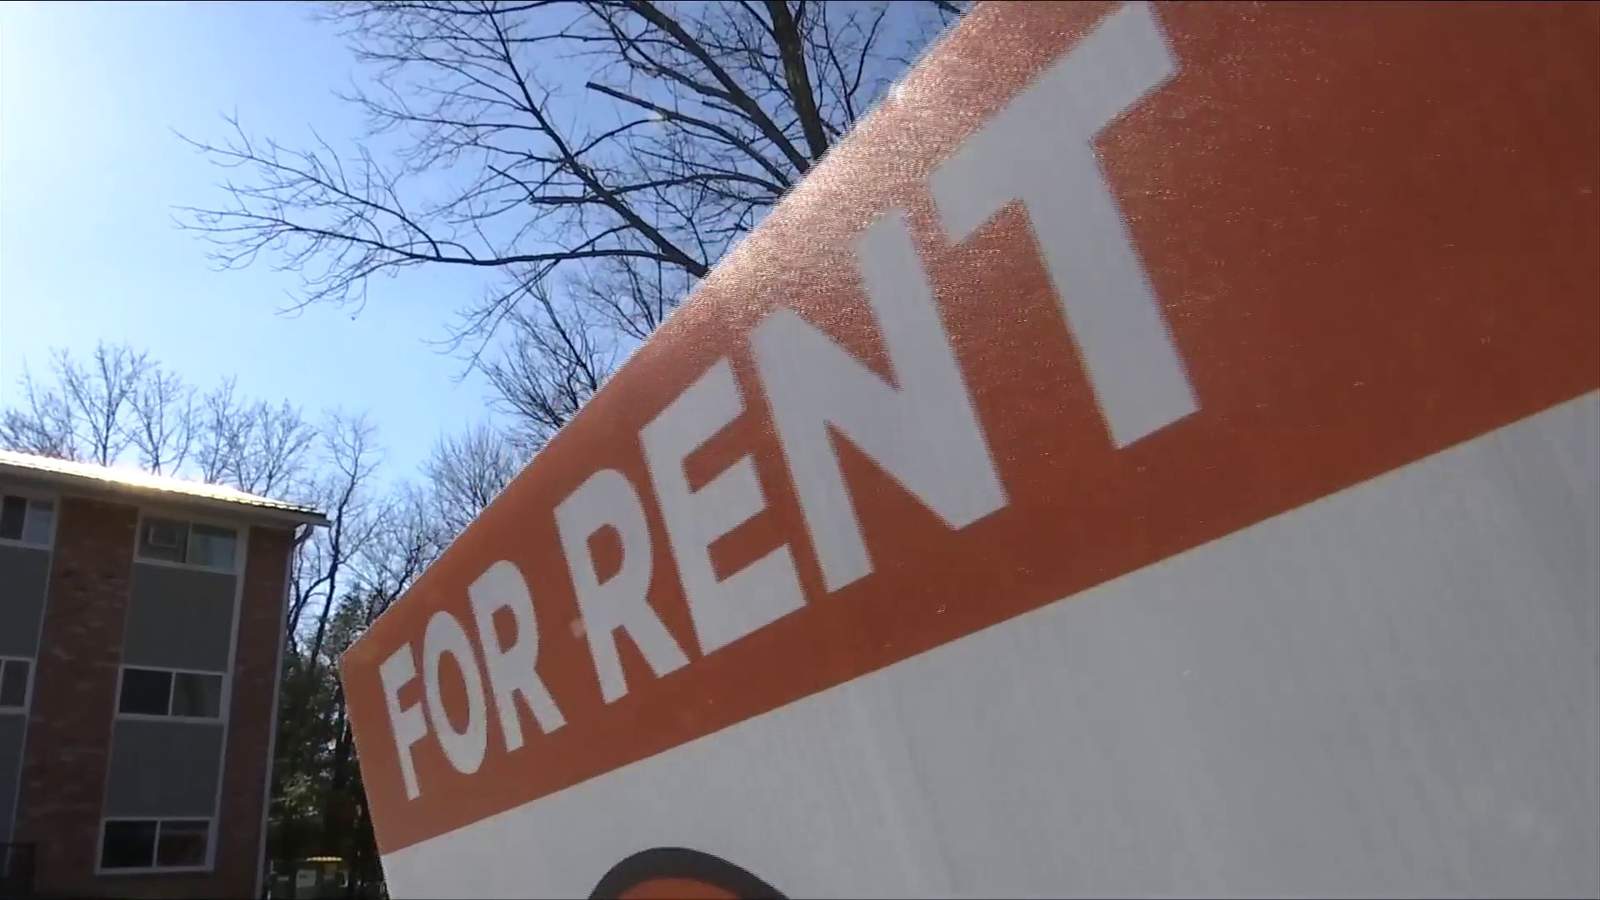 Blacksburg to address affordable housing shortage with $1 million federal grant